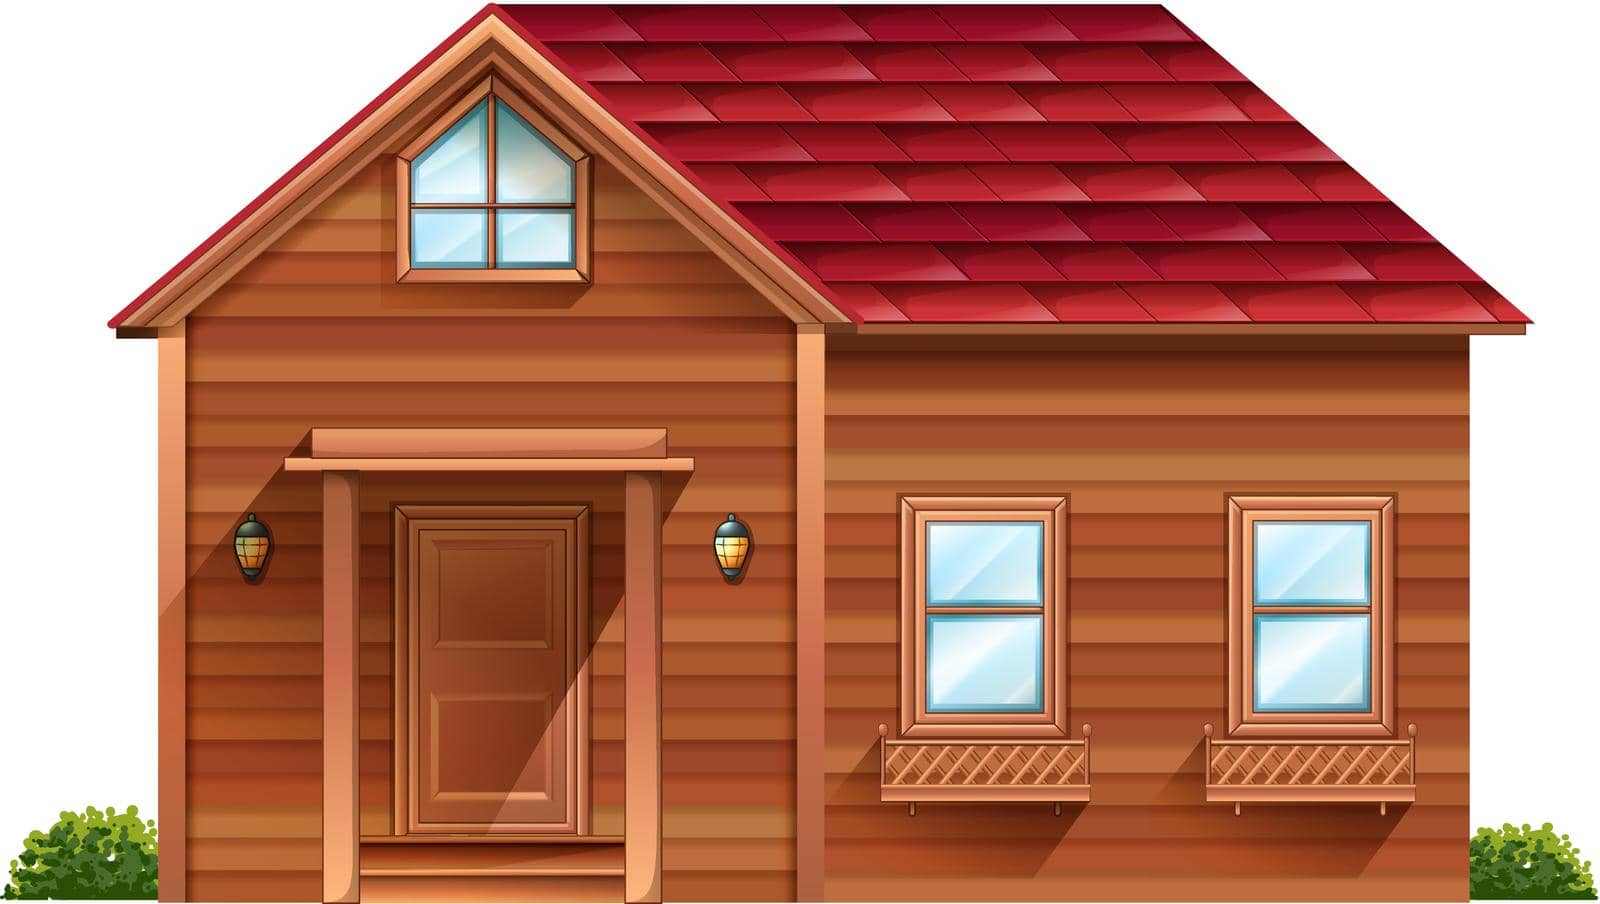 Illustration of a wooden house on a white background